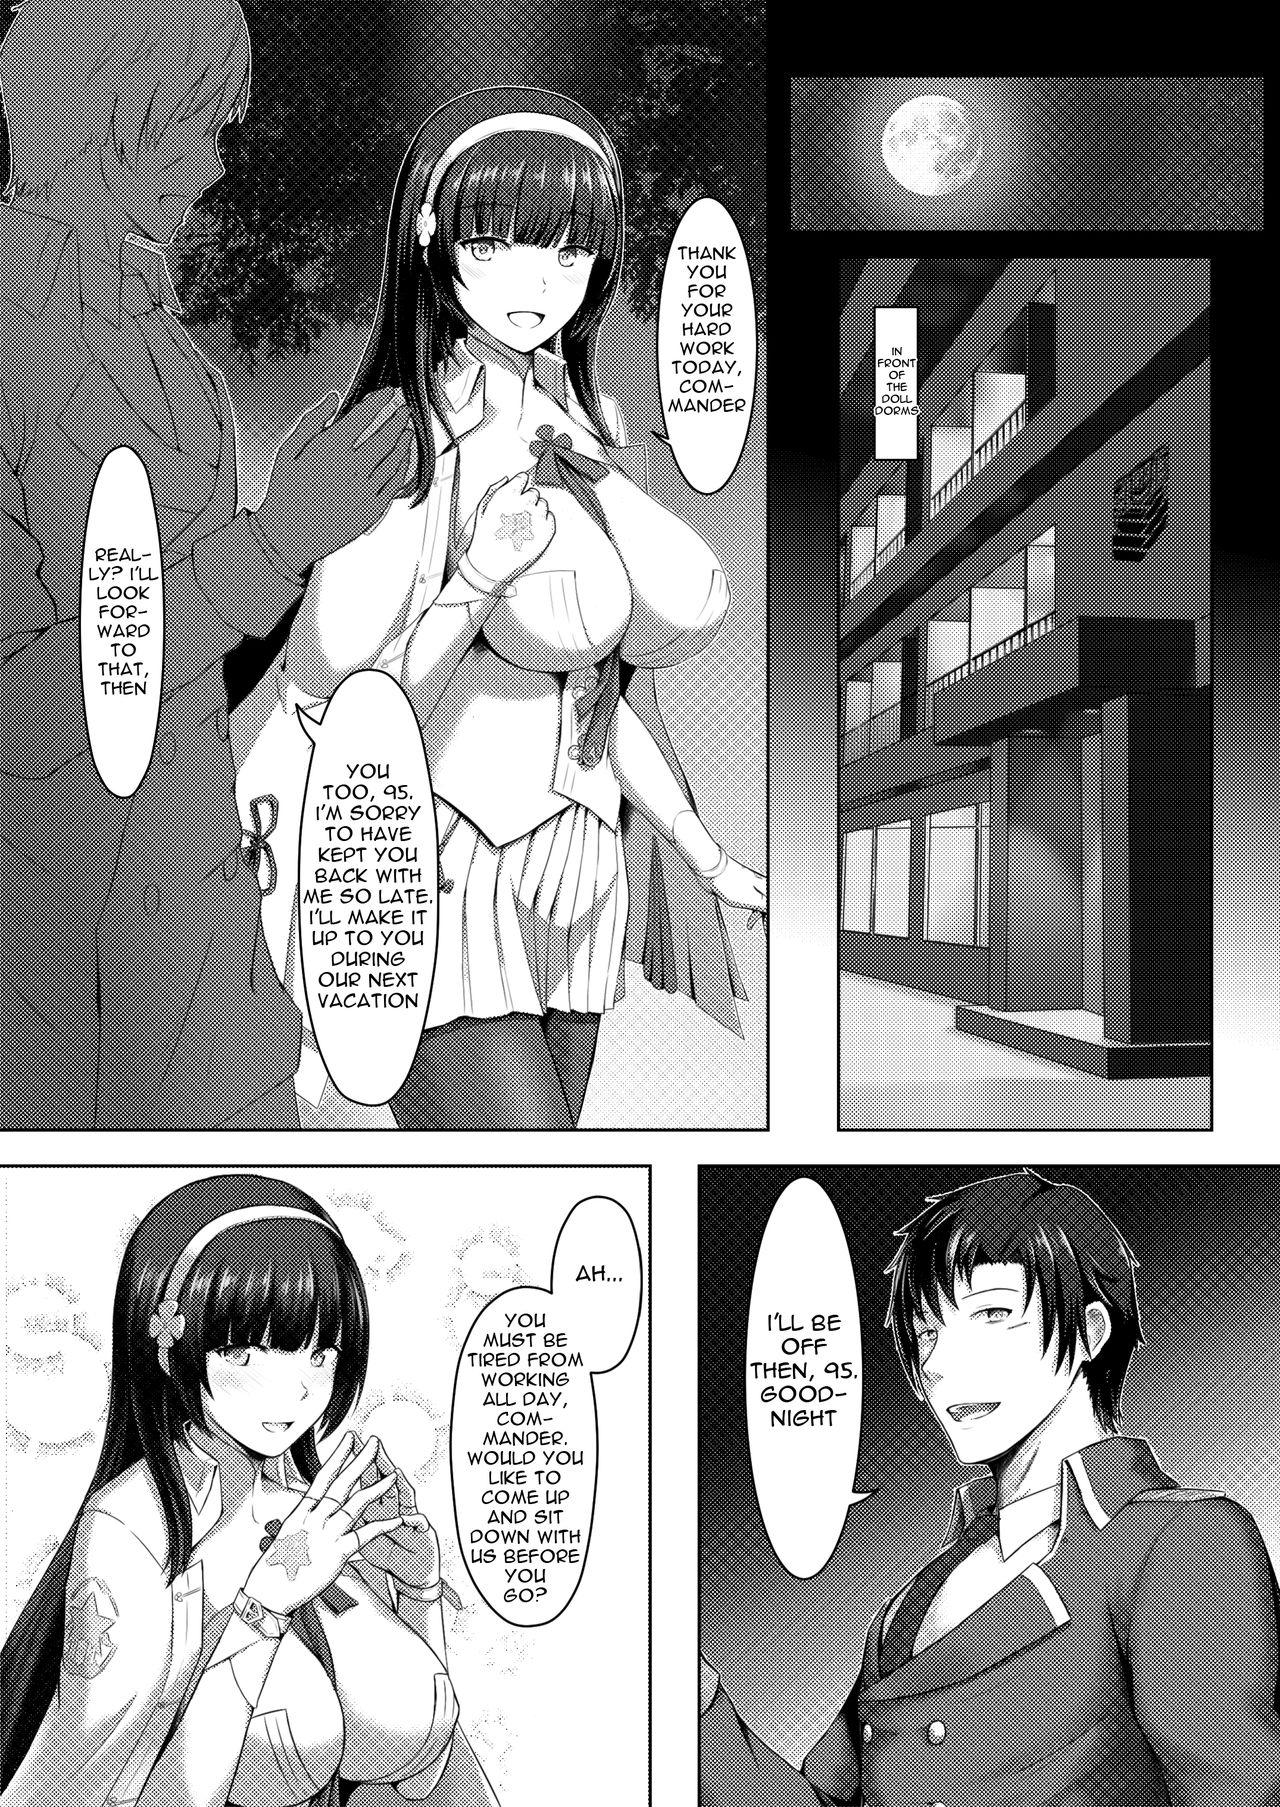 Foda A Lovely Flower's Gift - Girls frontline Fucked - Page 2